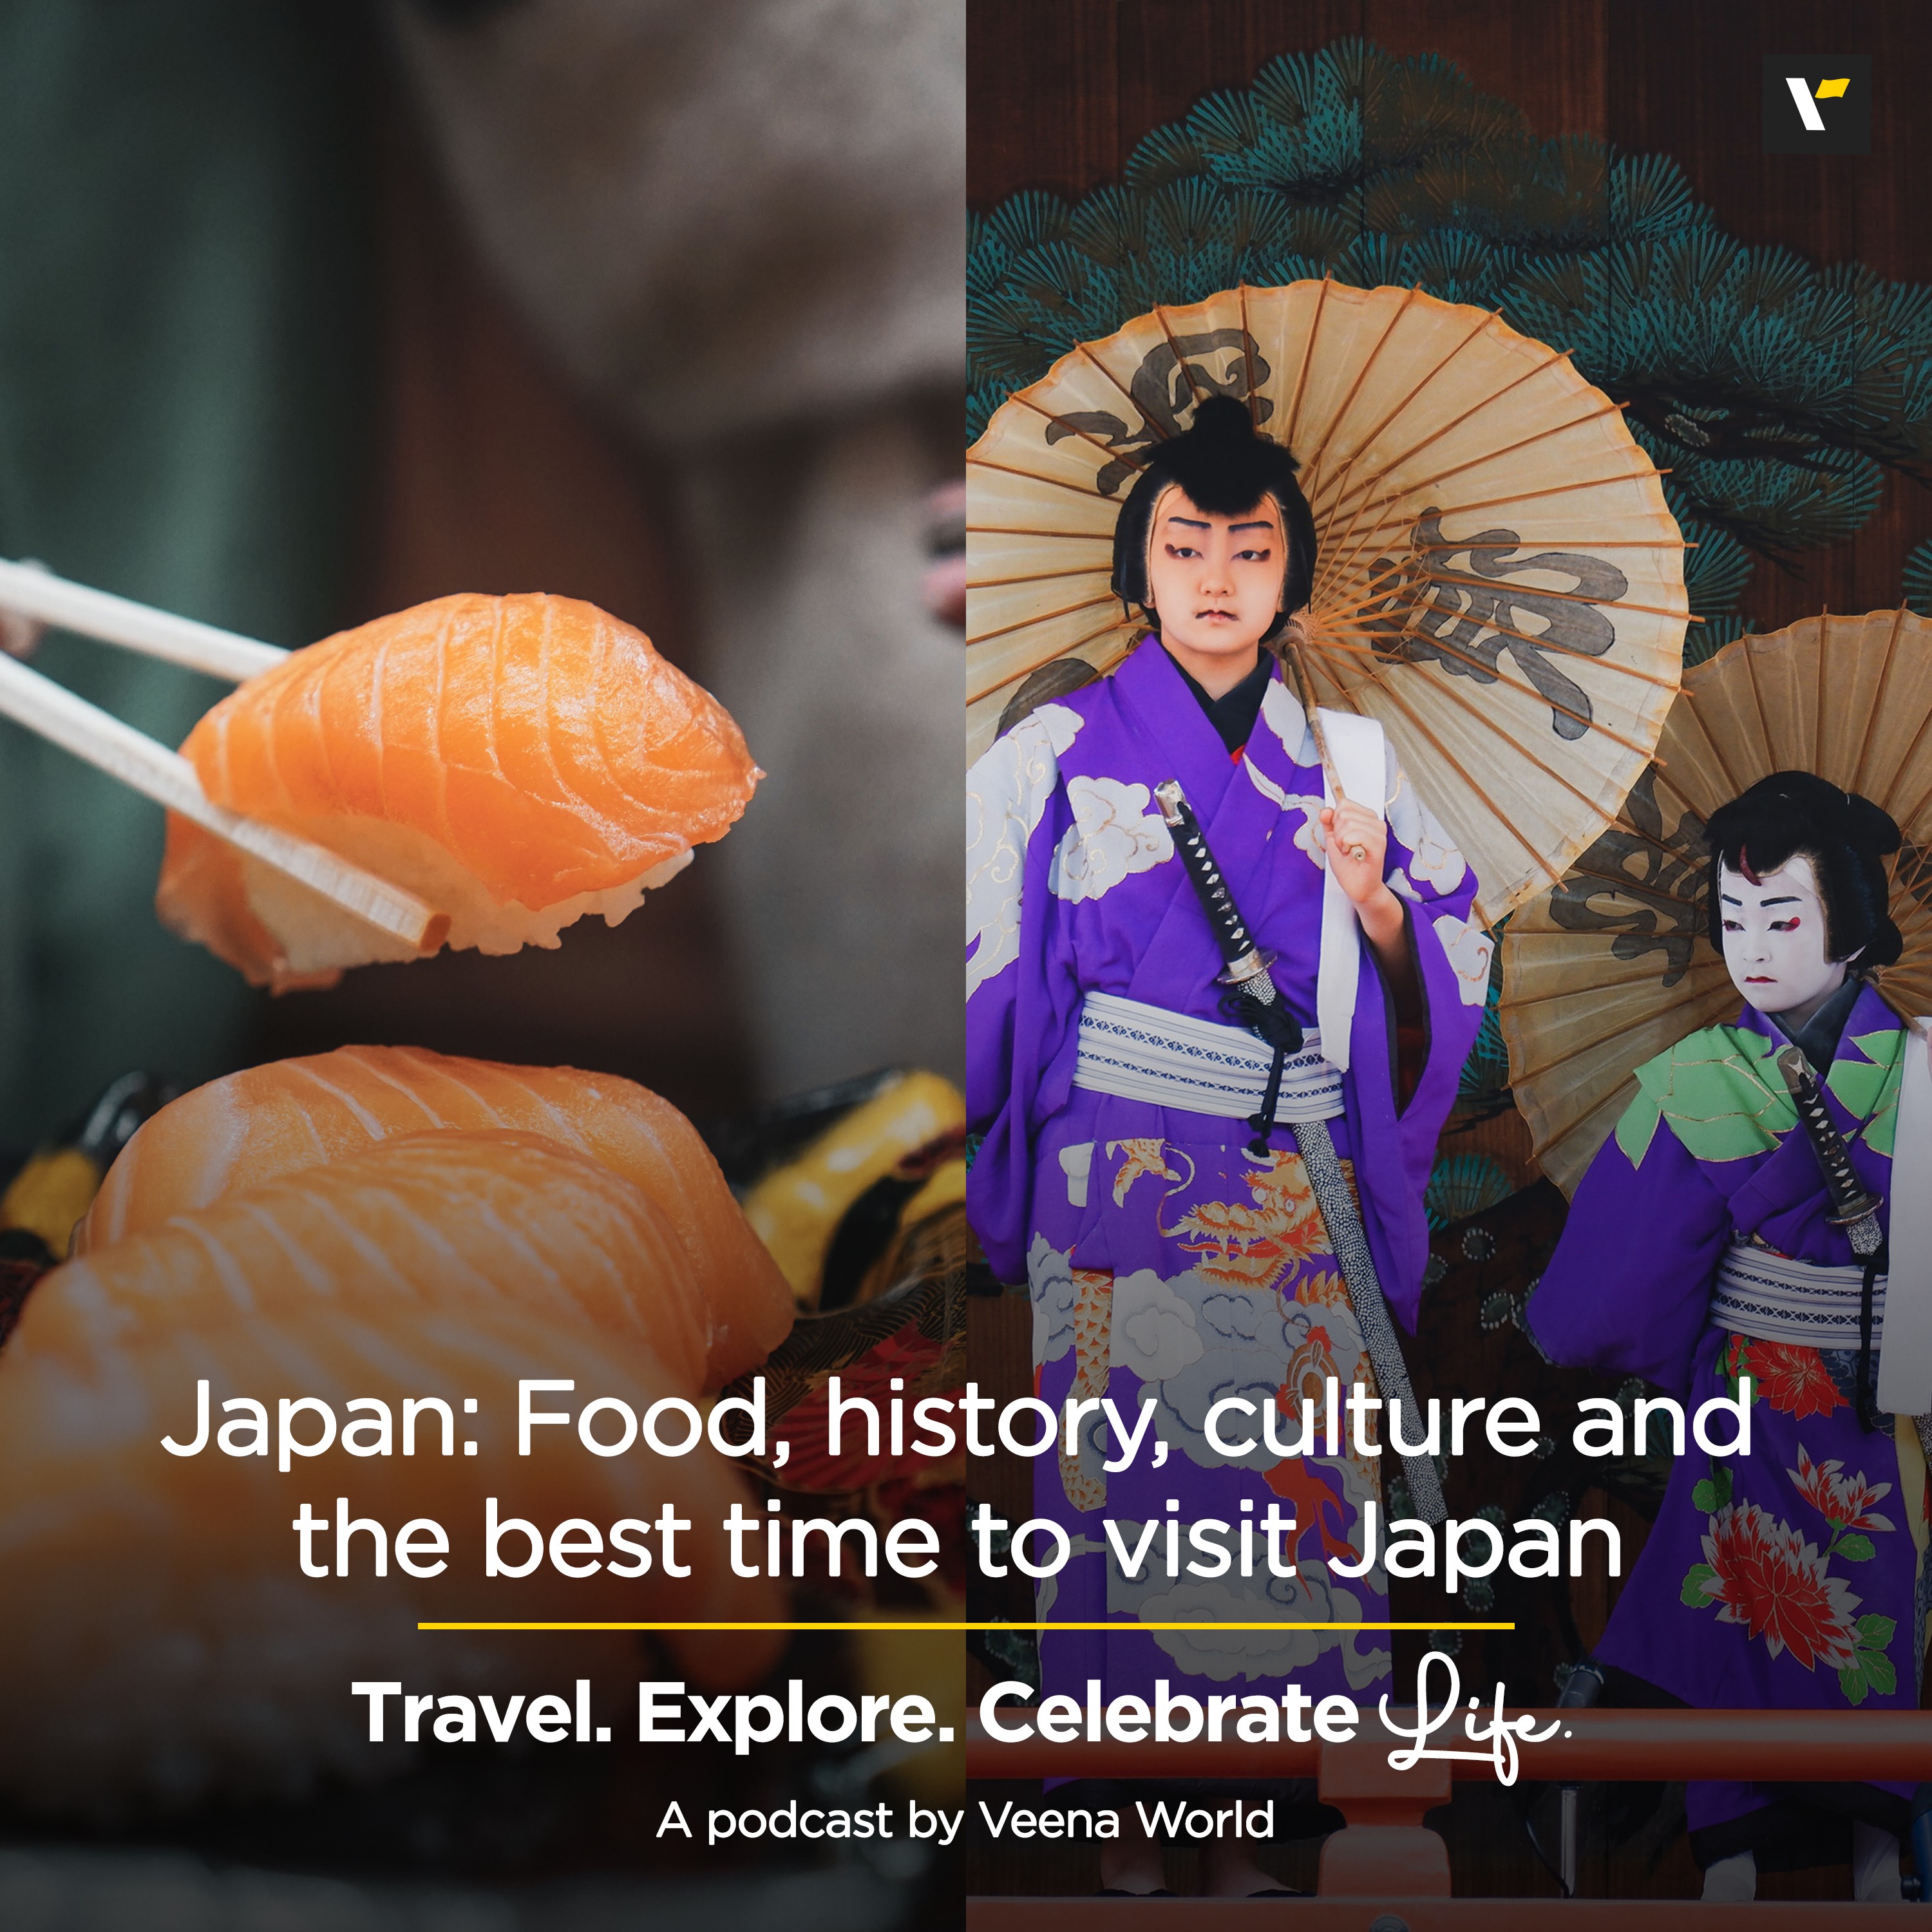 Japan: Food, history, culture and the best time to visit Japan